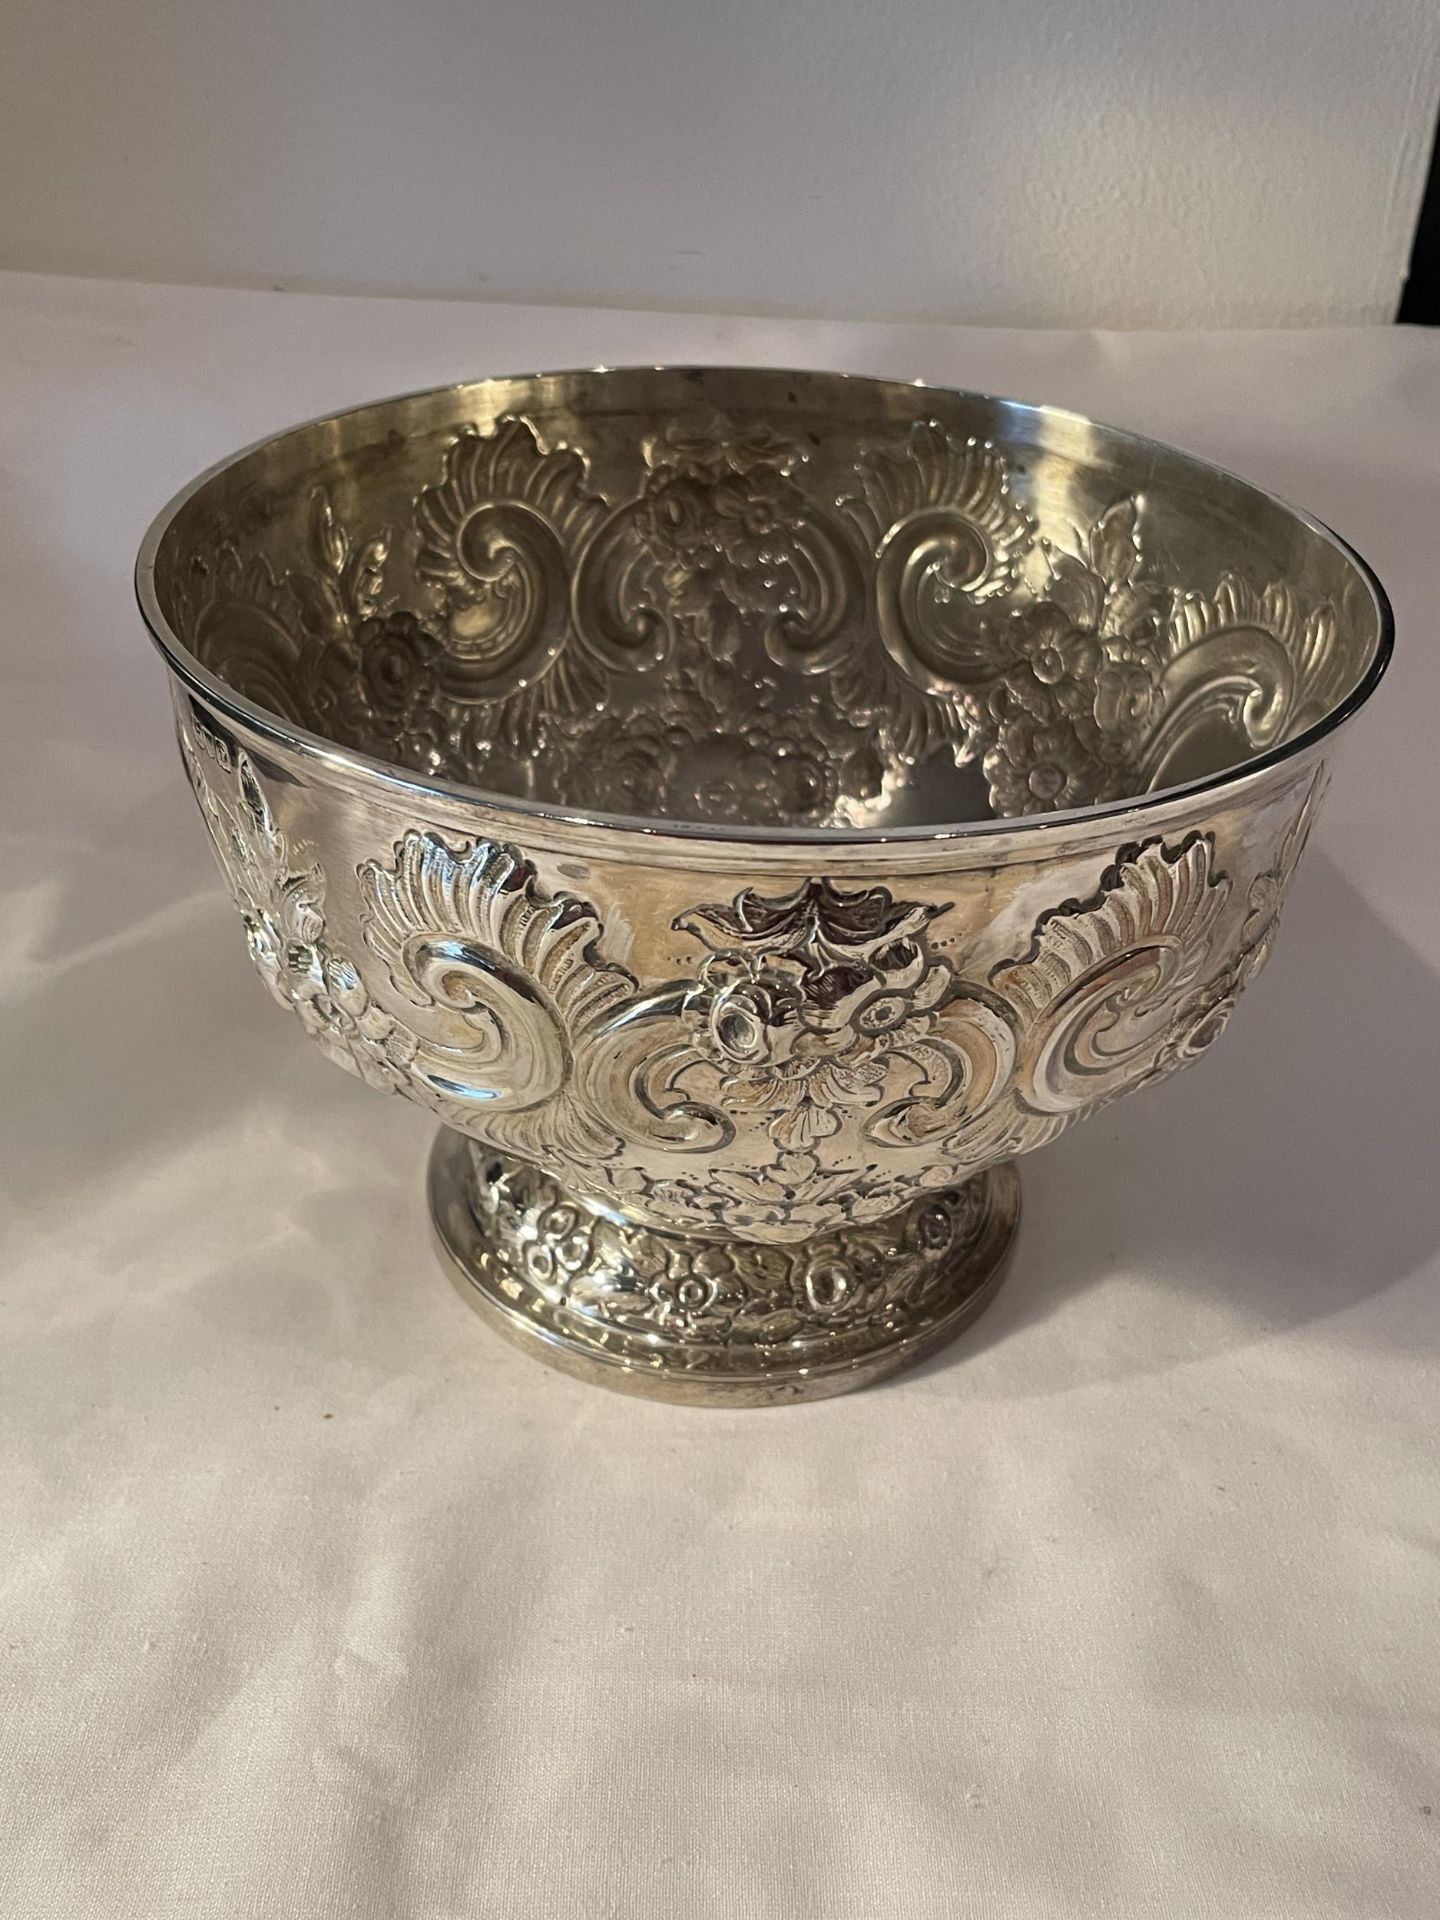 A 1901 HALLMARKED LONDON SILVER DECORATIVE FOOTED BOWL, INDISTINCT MAKER, GROSS WEIGHT 385 GRAMS - Image 6 of 15